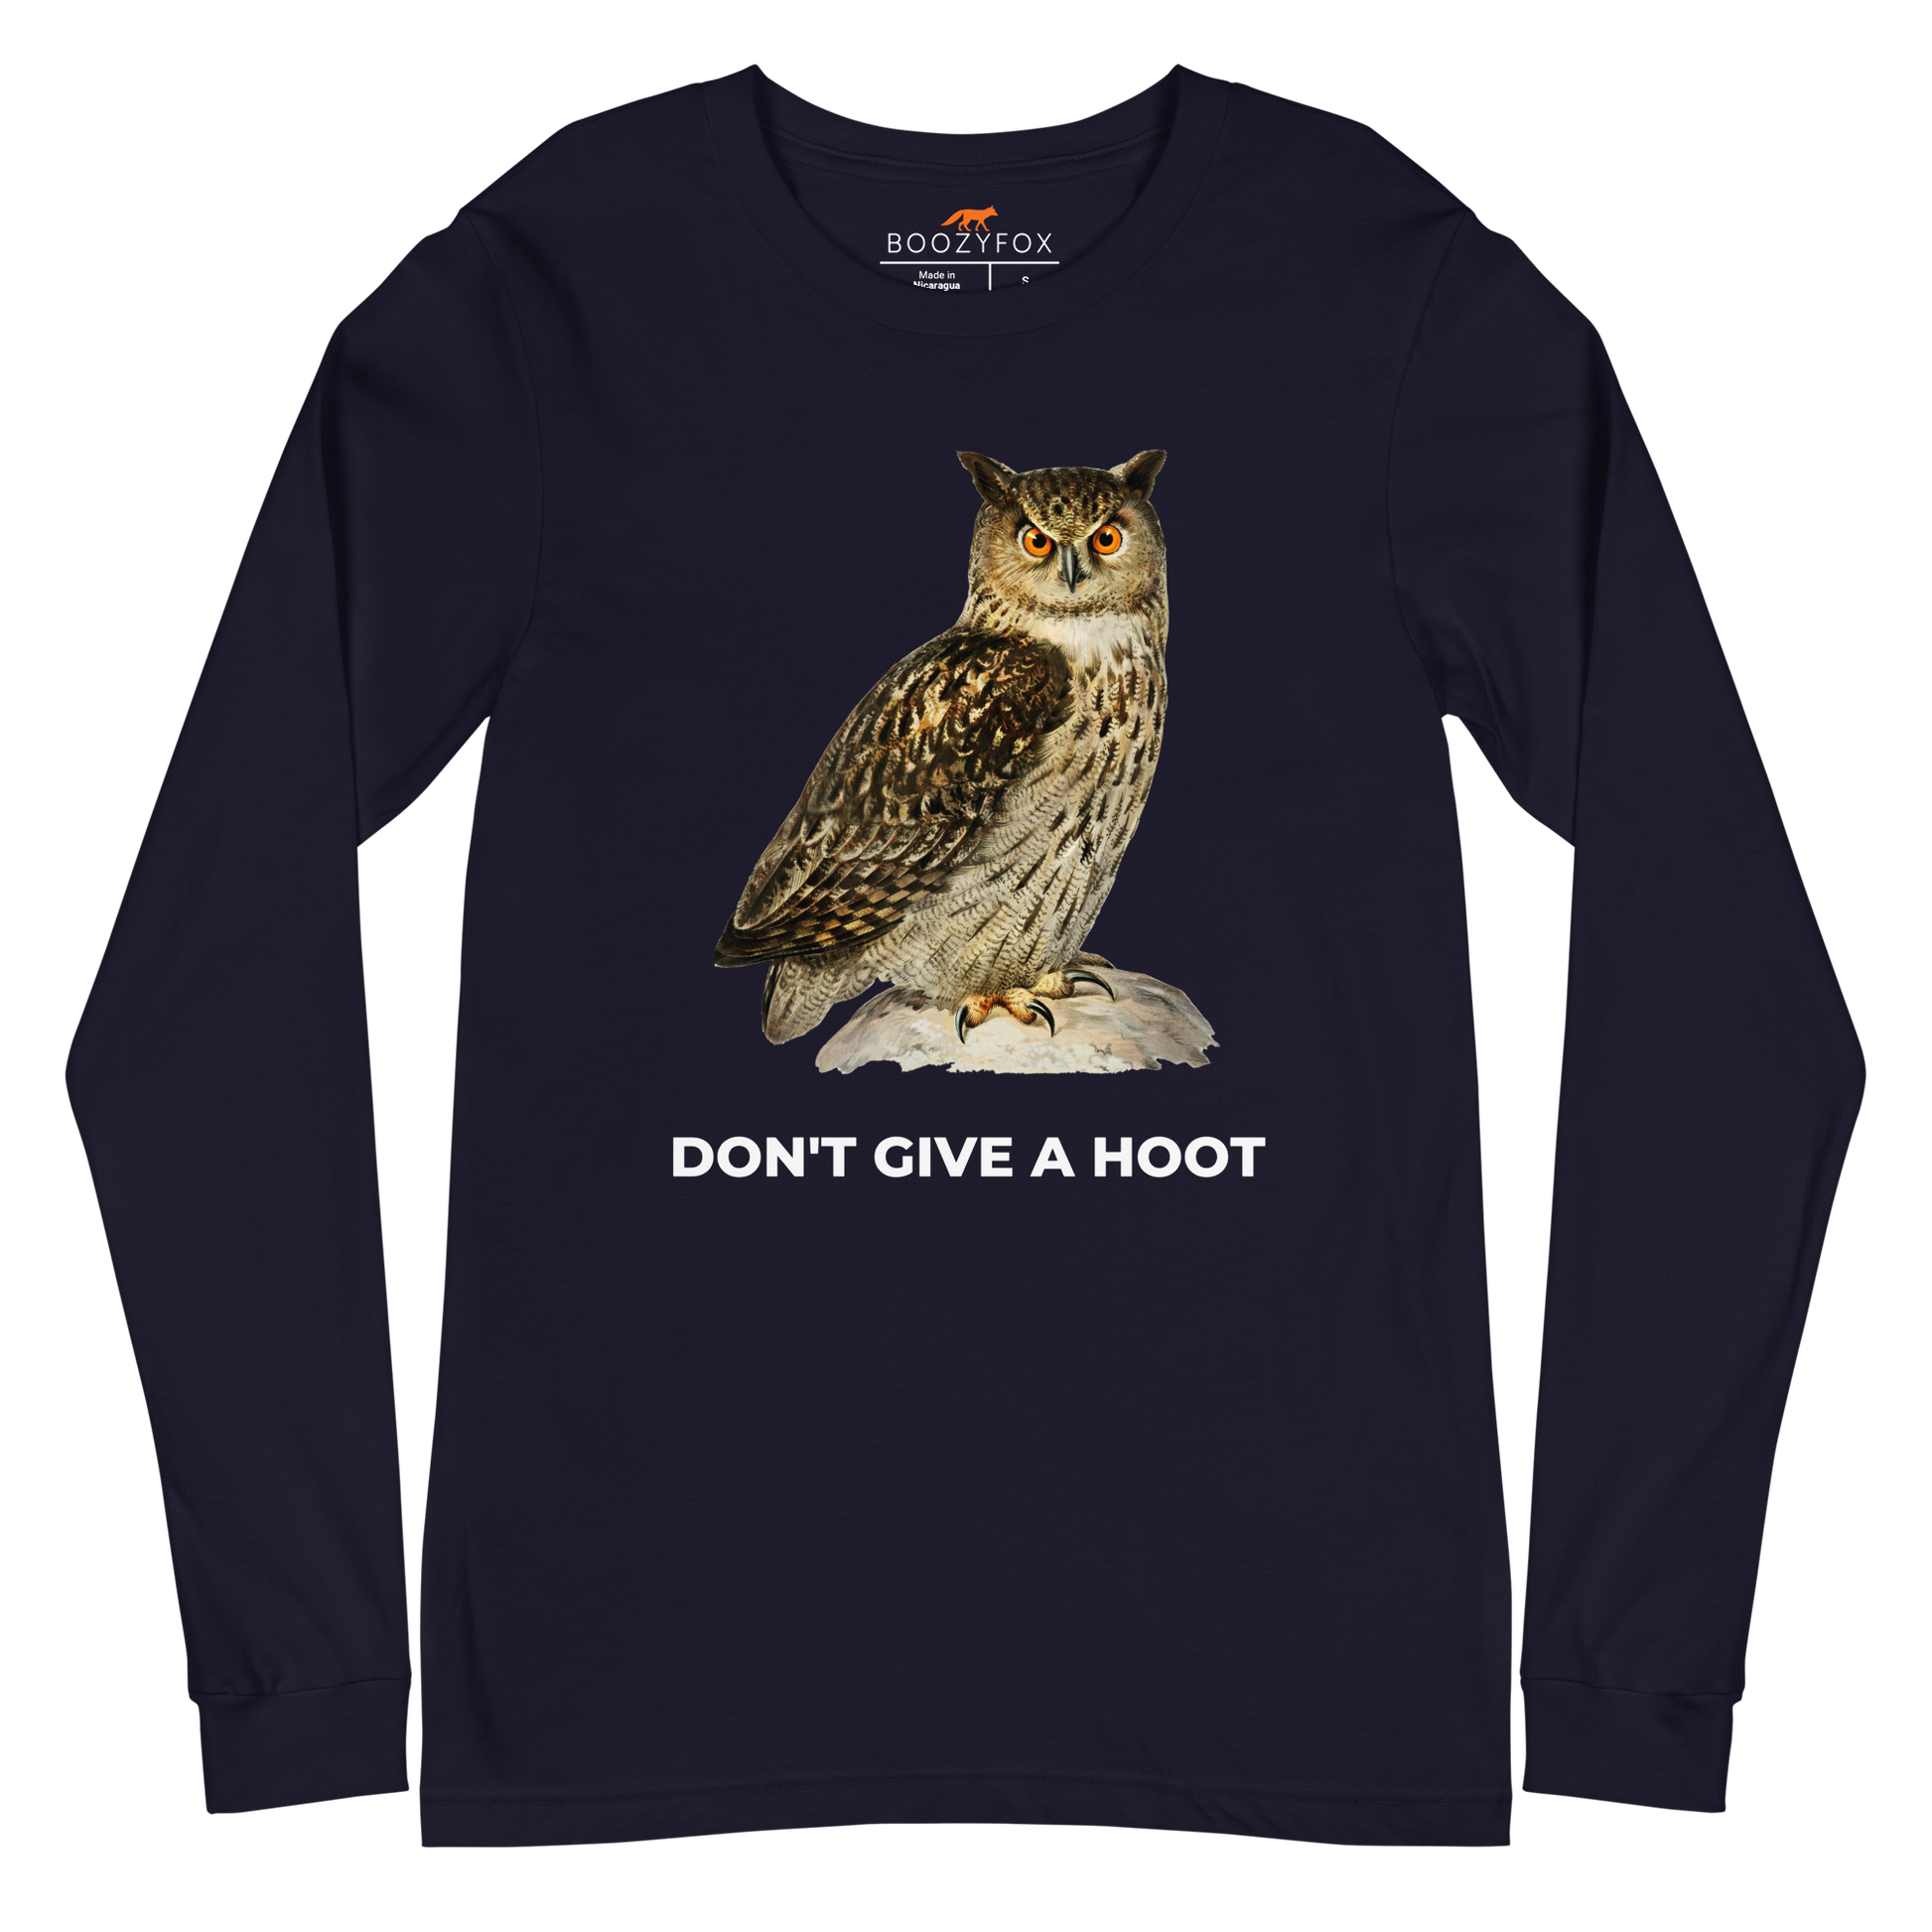 Navy Owl Long Sleeve Tee featuring a captivating Don't Give A Hoot graphic on the chest - Funny Owl Long Sleeve Graphic Tees - Boozy Fox